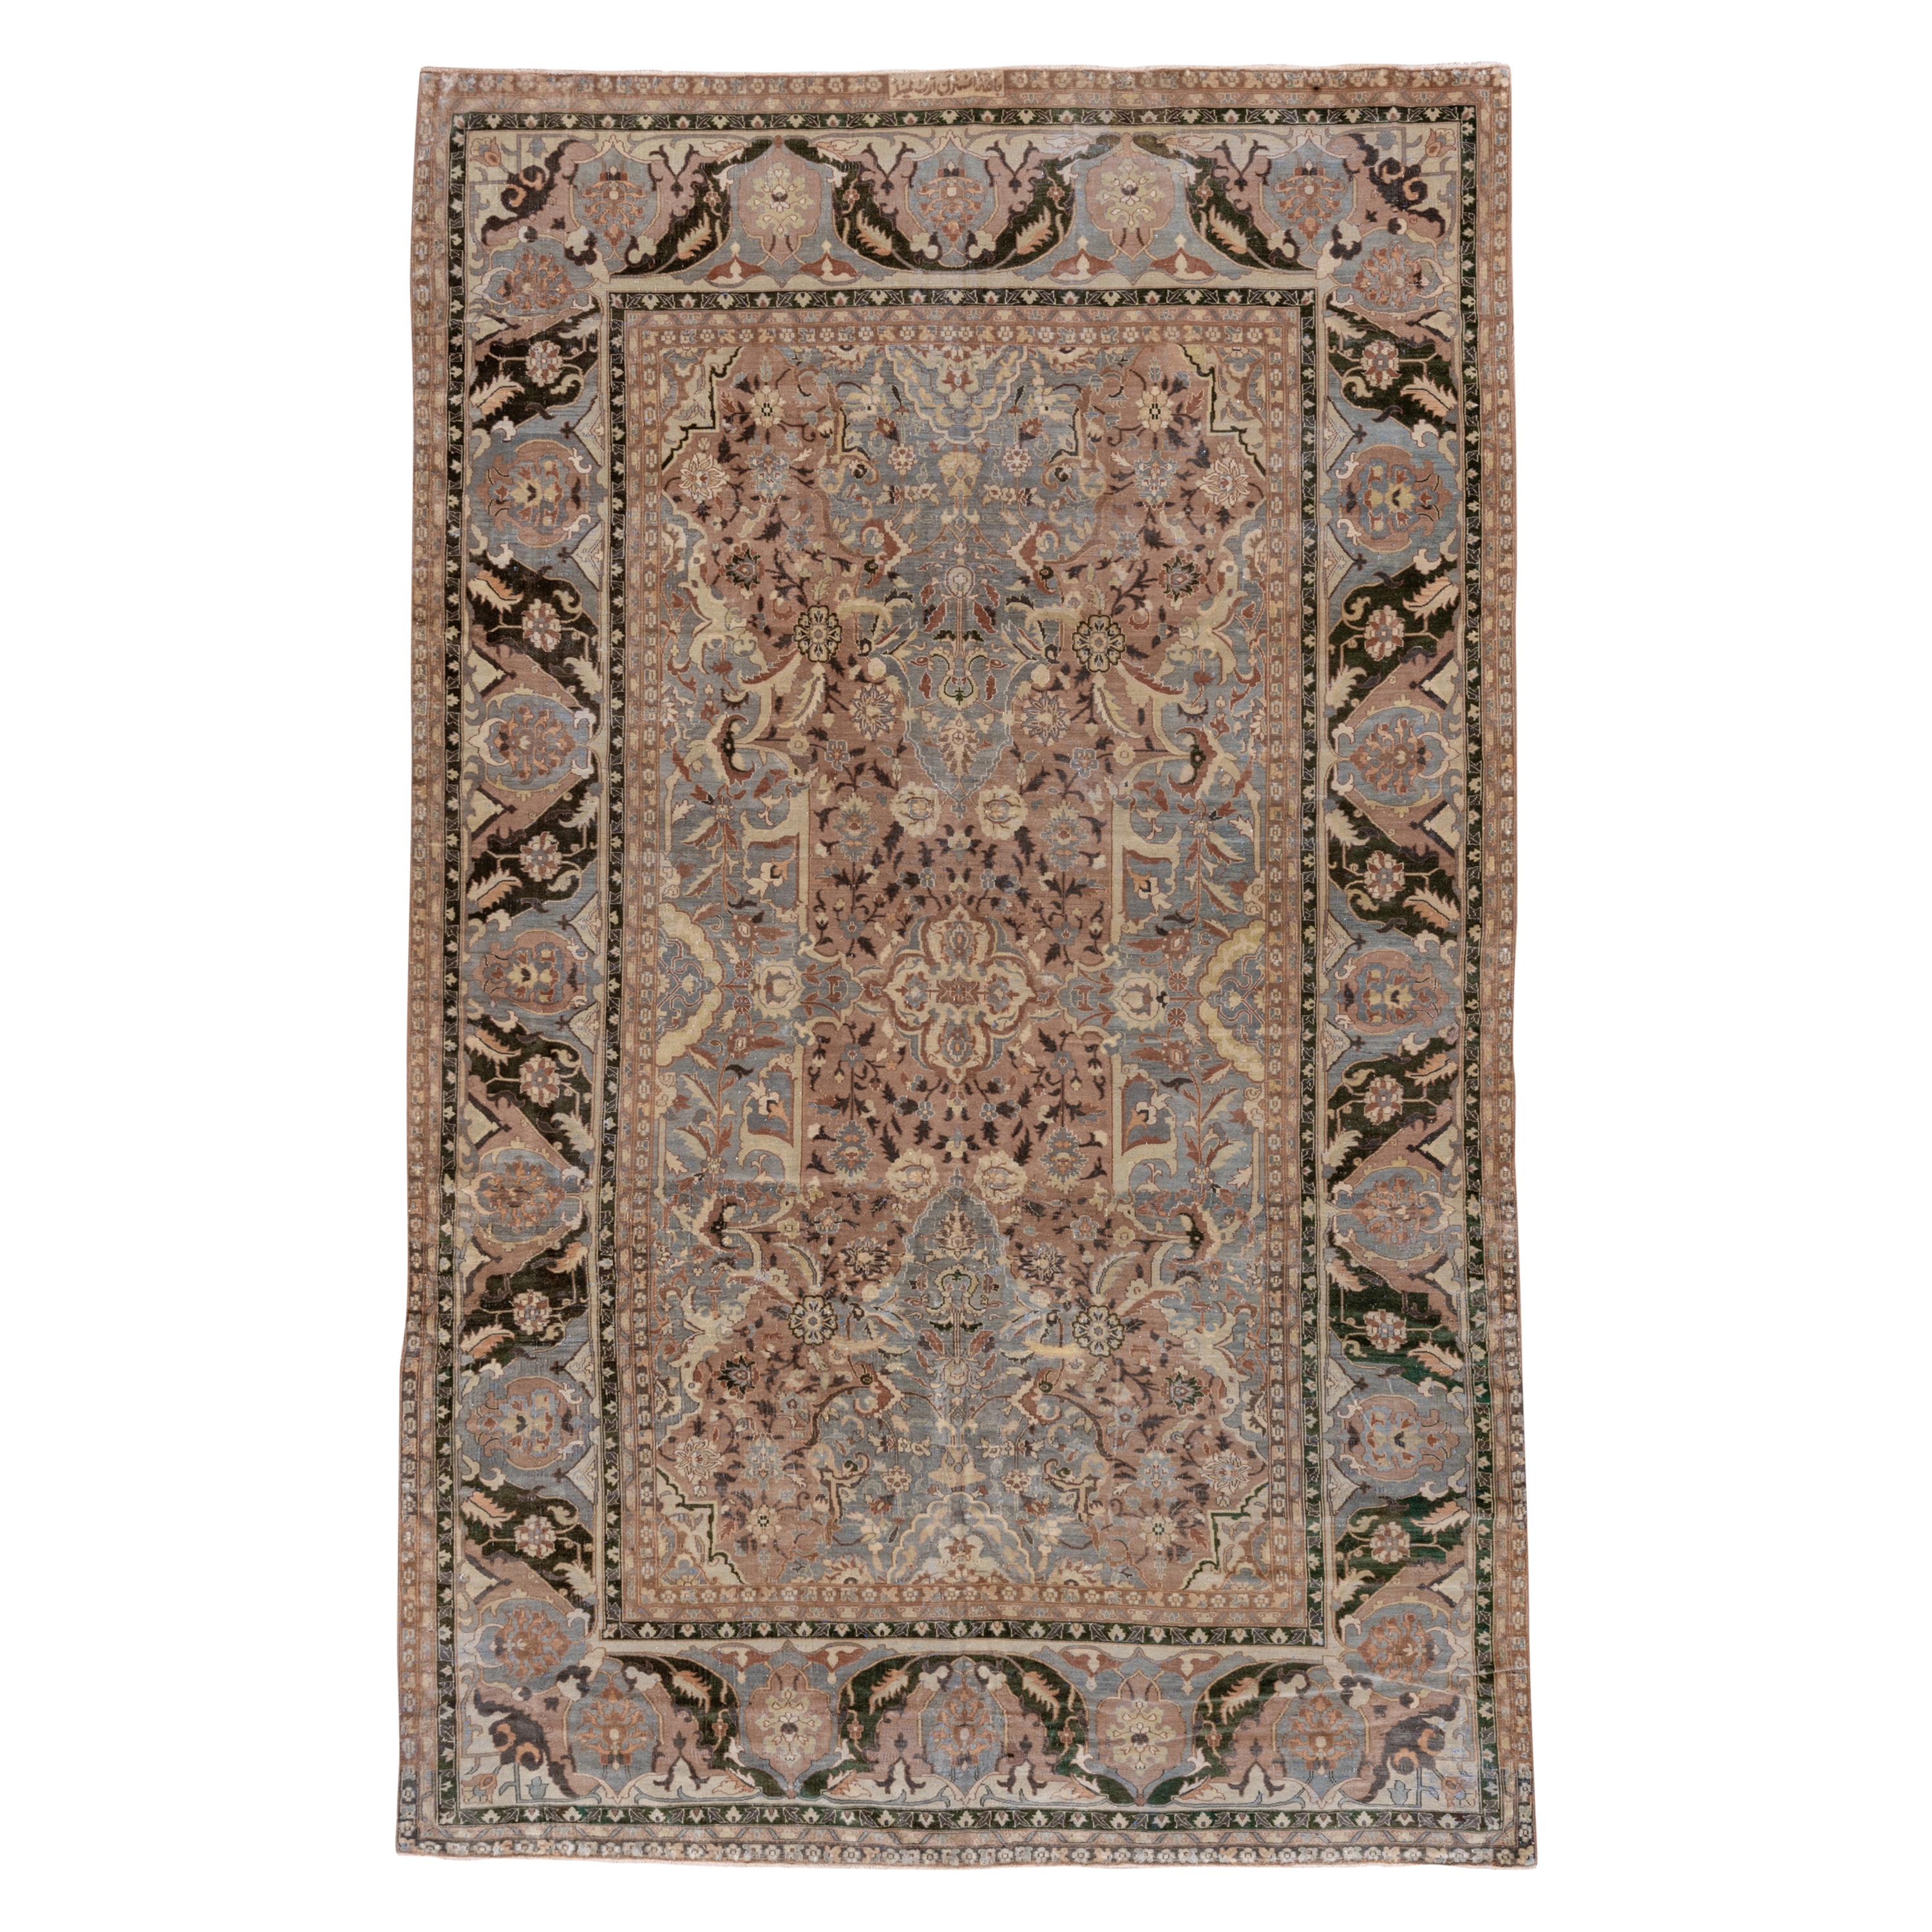 Antique Persian Polonaise Carpet, Gray and Pink All-Over Field, Black Borders